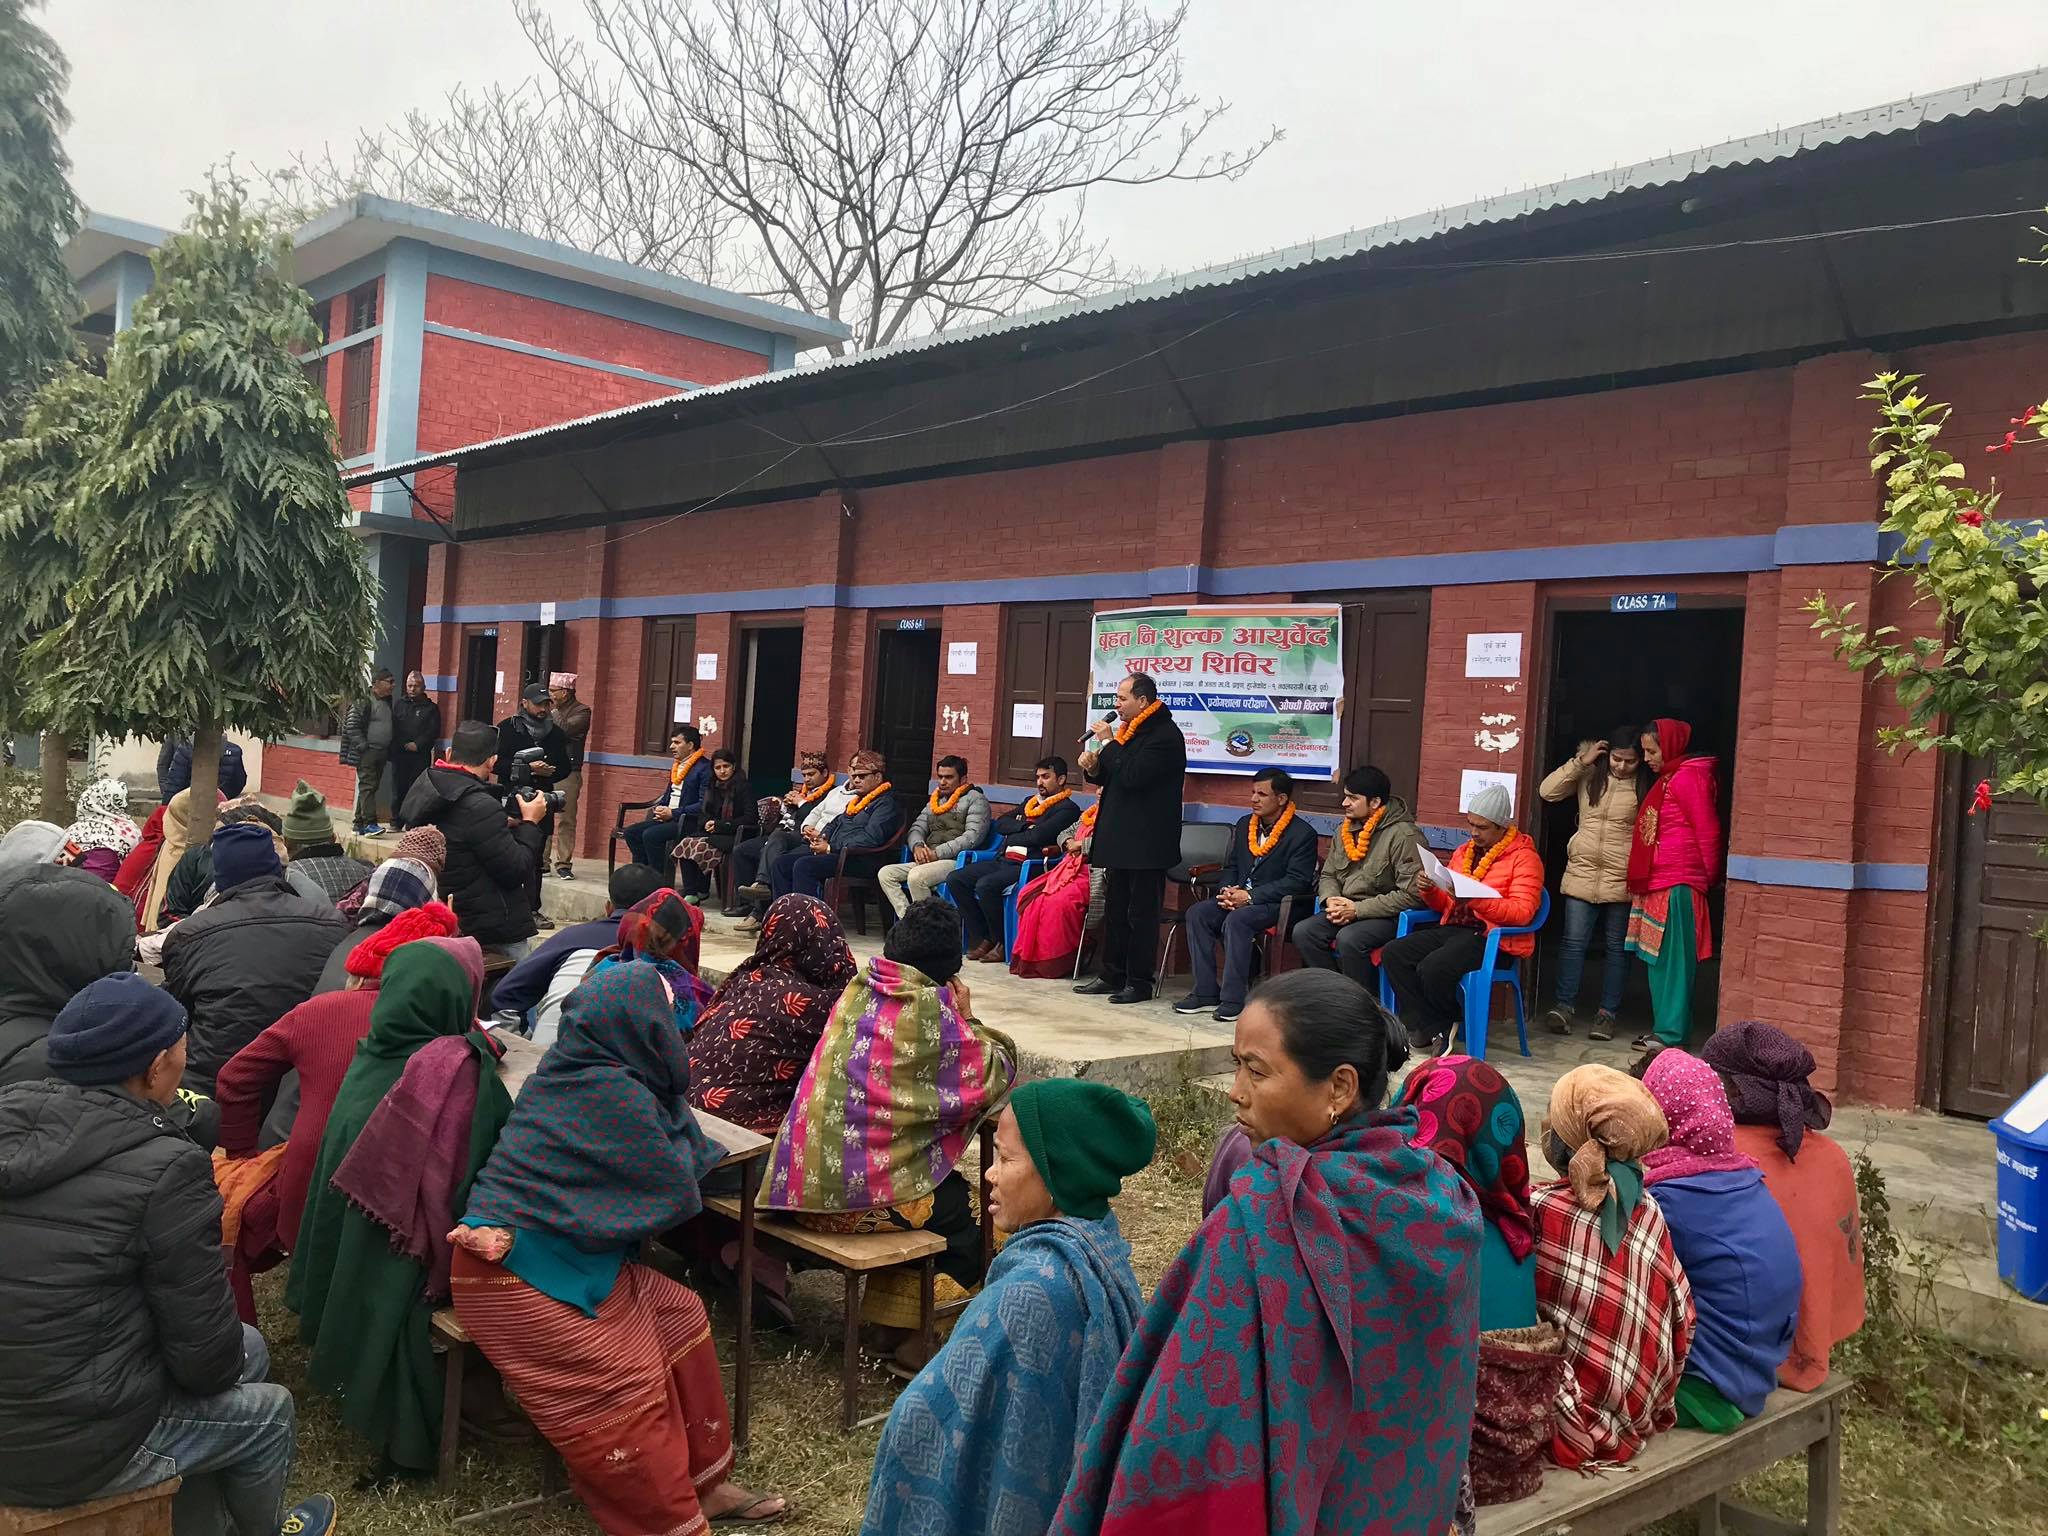 An outreach health clinic organised in Hupsekot, Nawalpur. The health clinics we organise in the leadership of locals are the opportunities for communities to avail specialised health services at their local area.